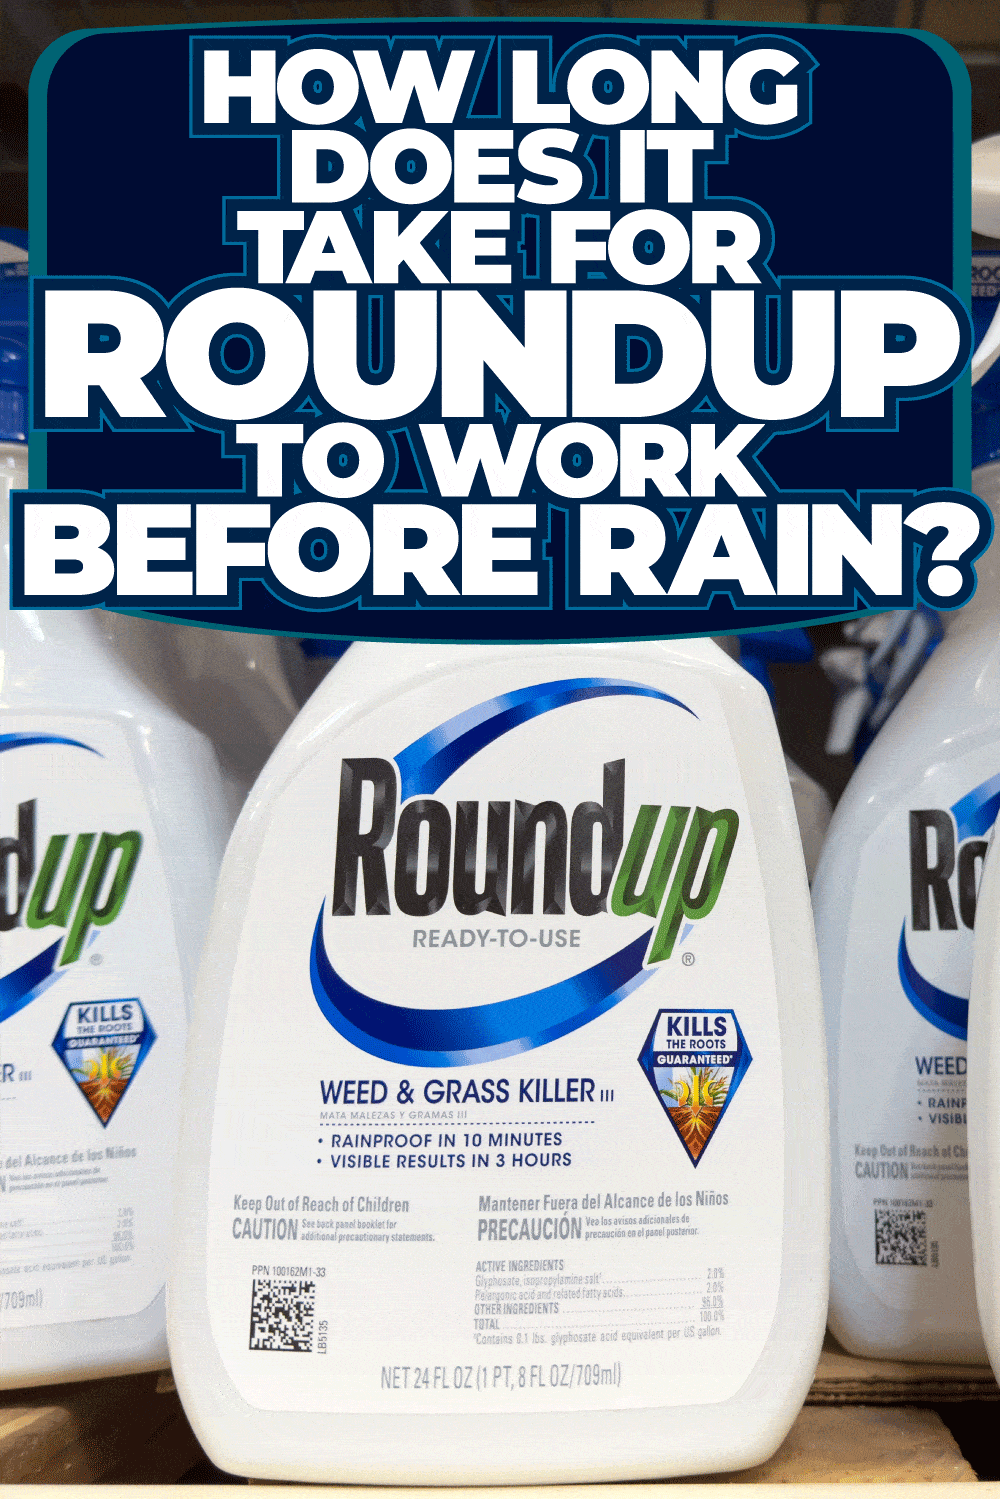 How Long Does It Take For Roundup To Work Before Rain?